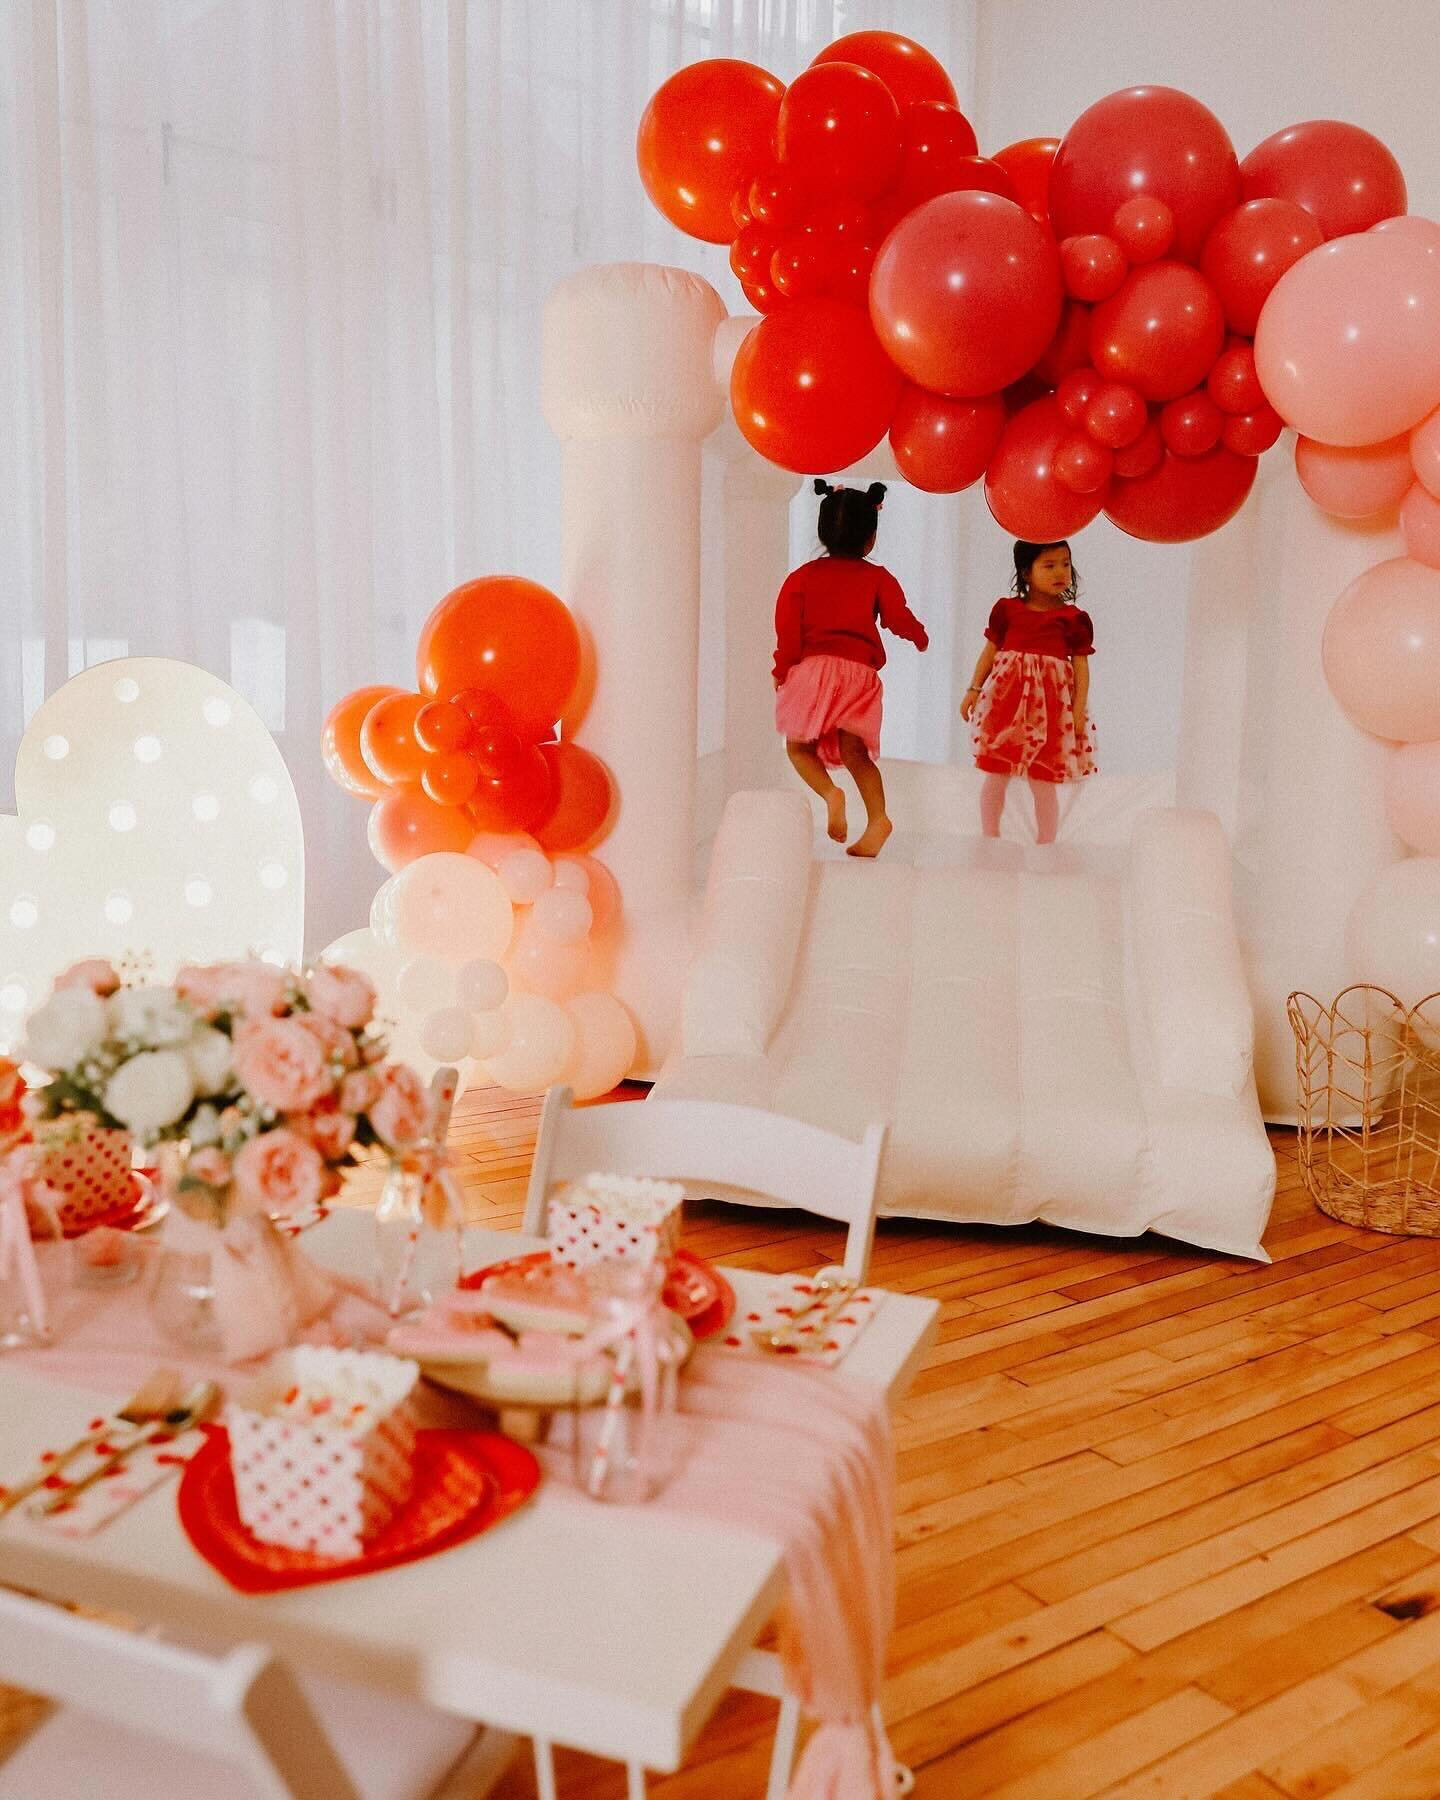 details ✨ tablescaping and event styling for our kids parties is a service we are pleased to offer! send us an inquiry if you&rsquo;re planning for your children&rsquo;s birthday this year and could use an extra hand, we would love to help 🥰

Photog